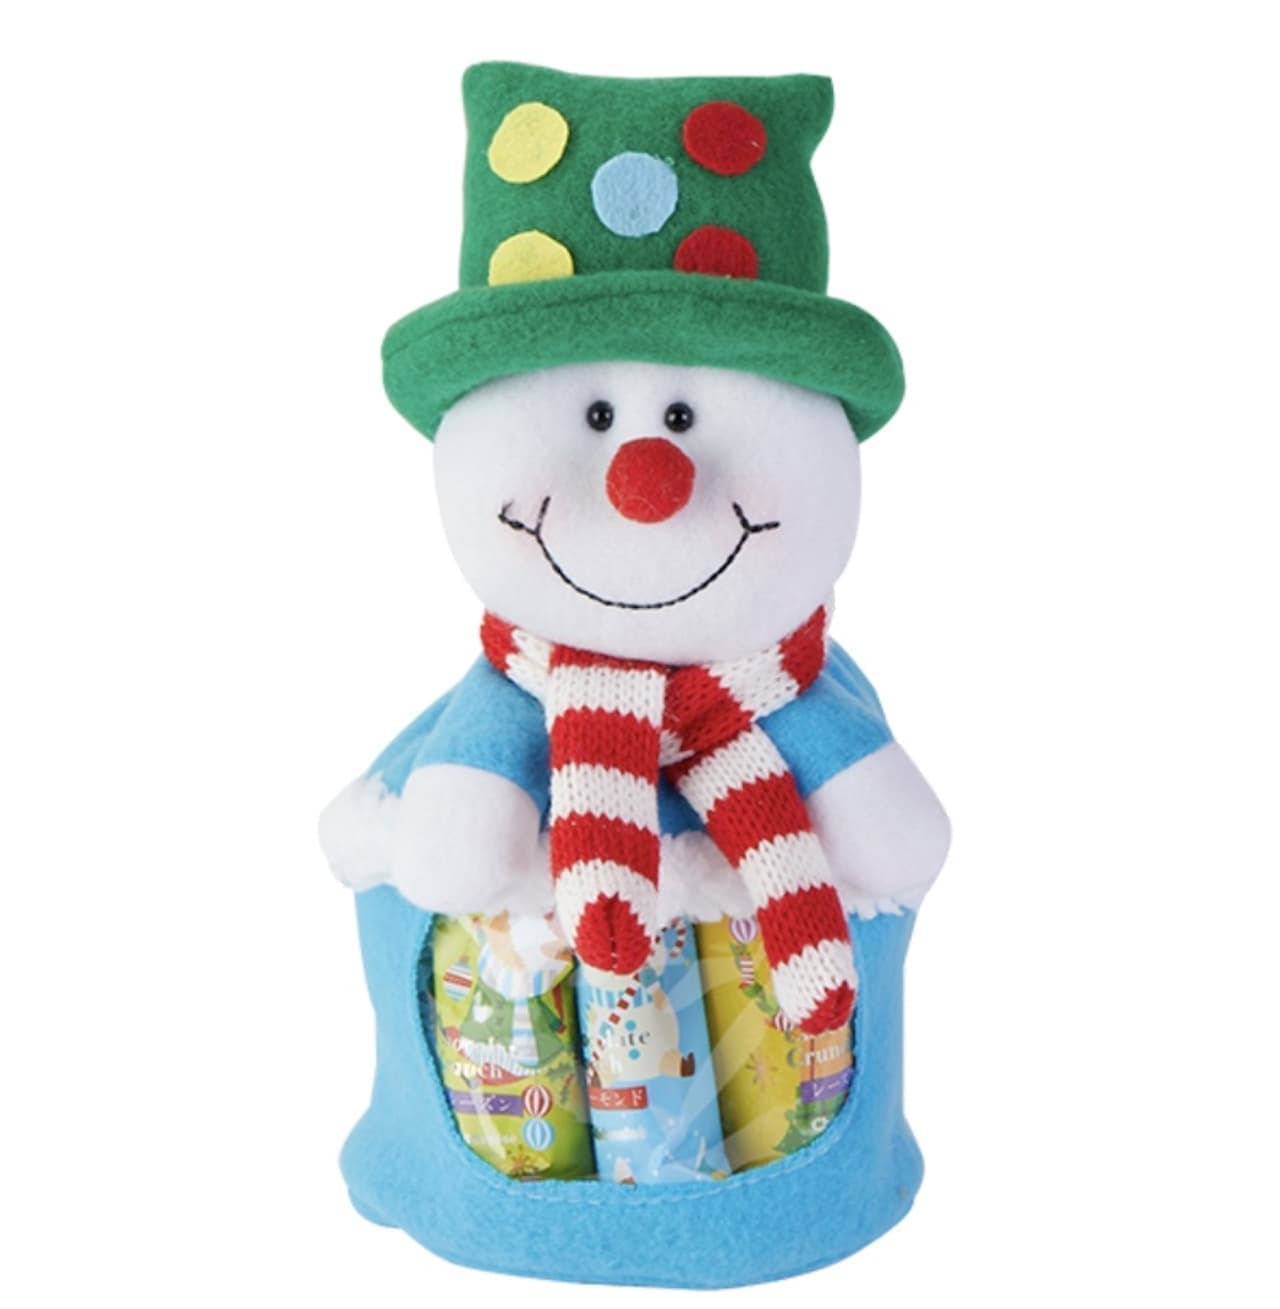 Chateraise "Christmas Sweets Doll Snowman